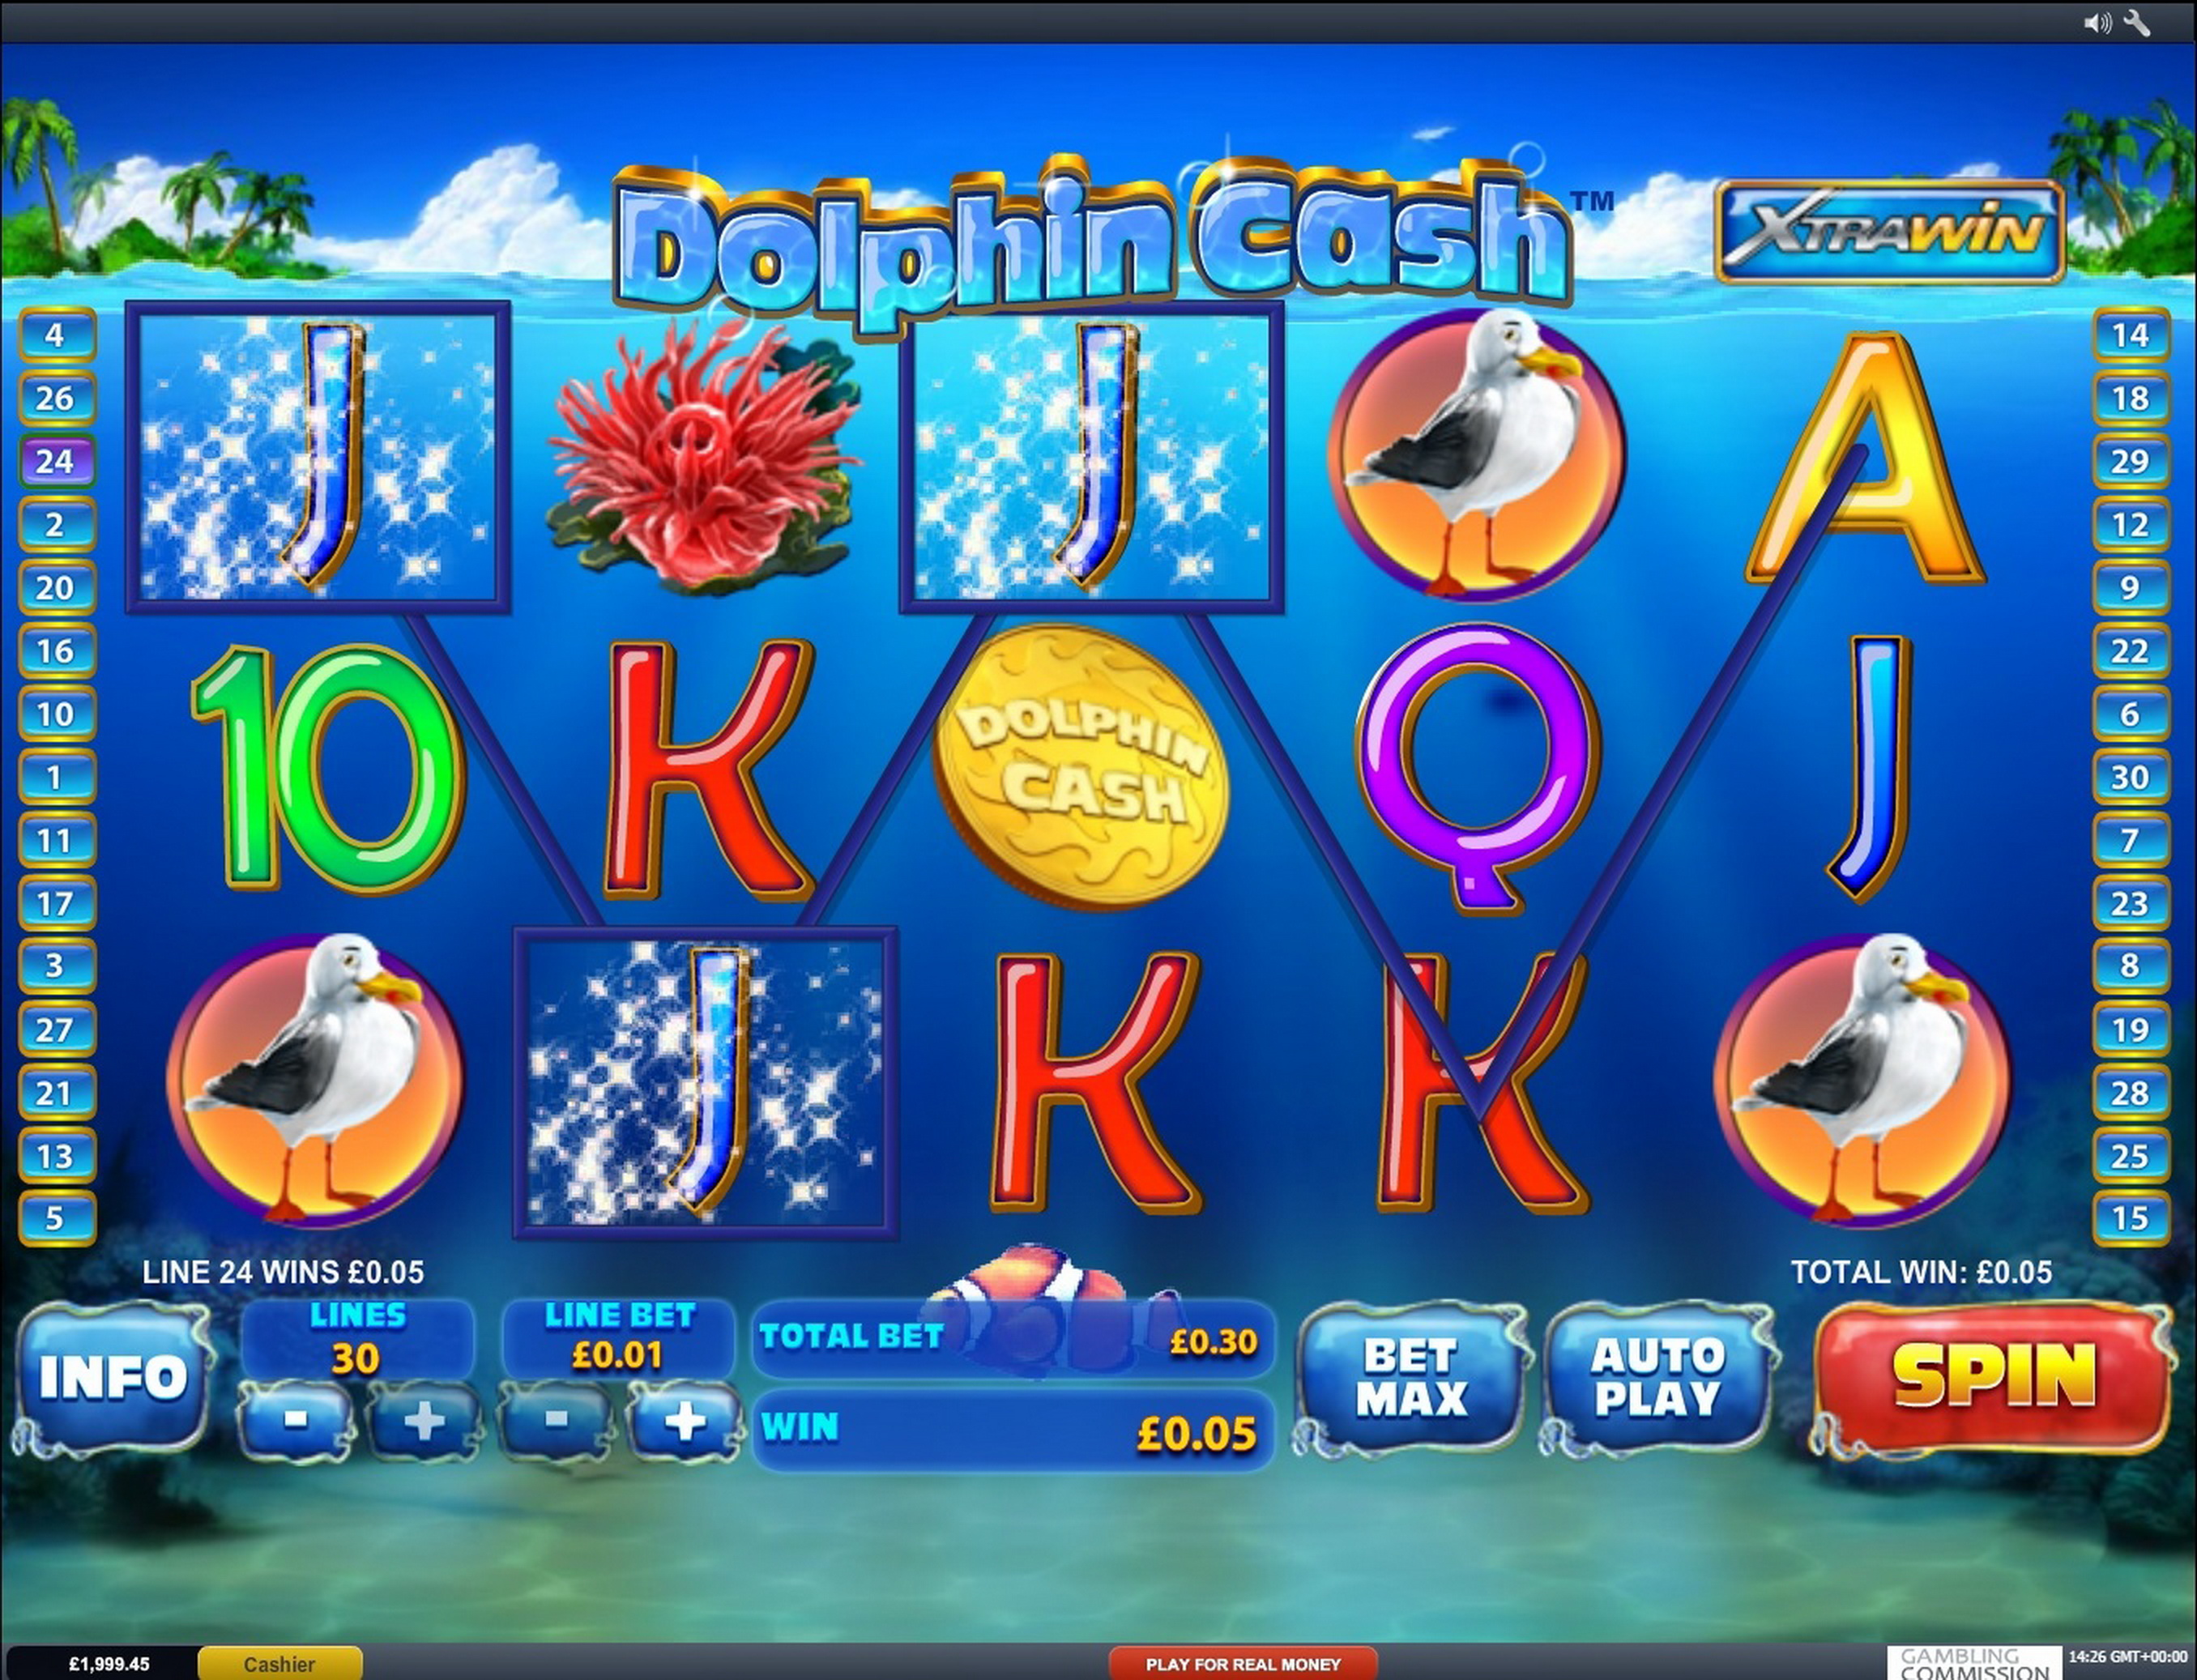 Win Money in Dolphin Cash Free Slot Game by Playtech